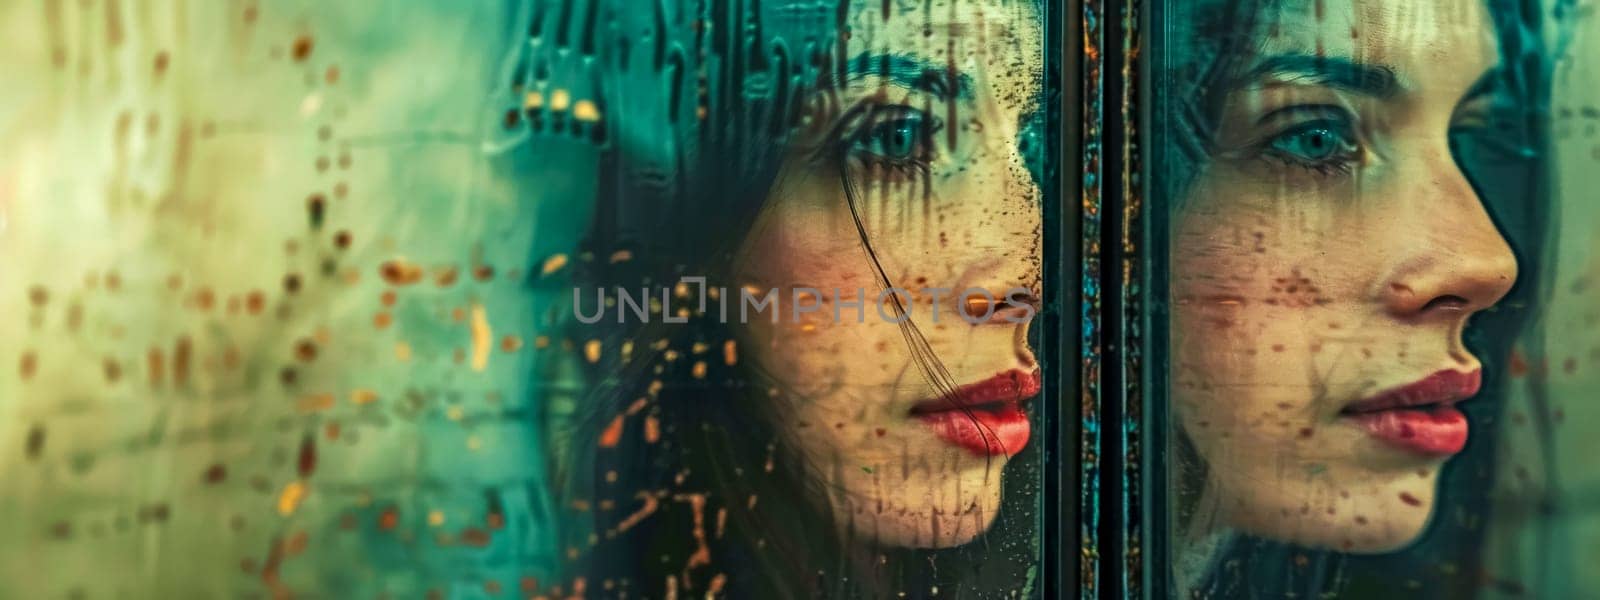 Mysterious woman behind rain-streaked glass by Edophoto